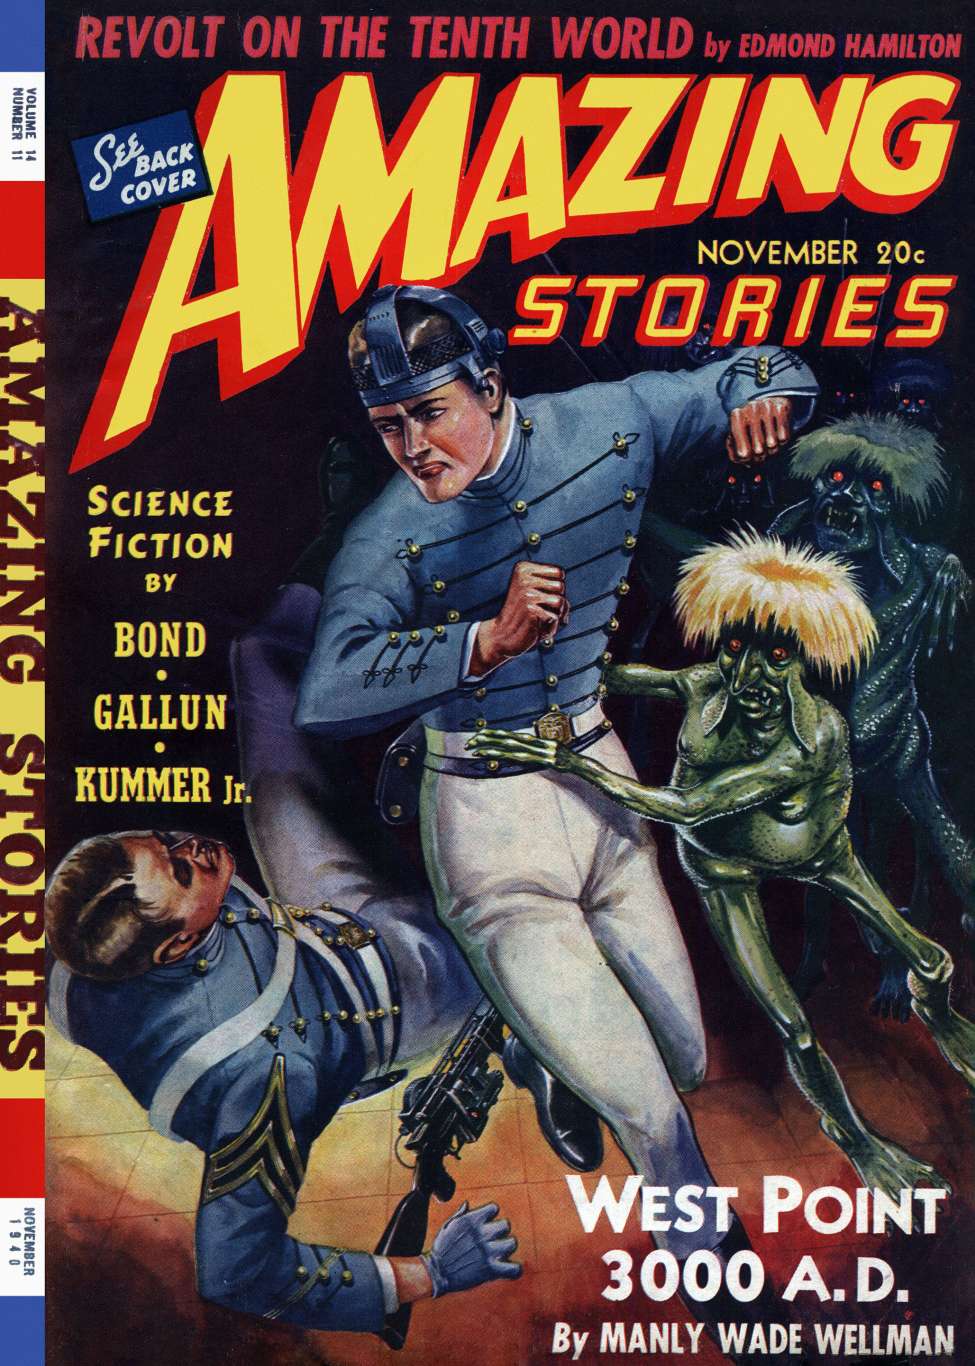 Book Cover For Amazing Stories v14 11 - West Point, 3000 A.D. - Manly Wade Wellman